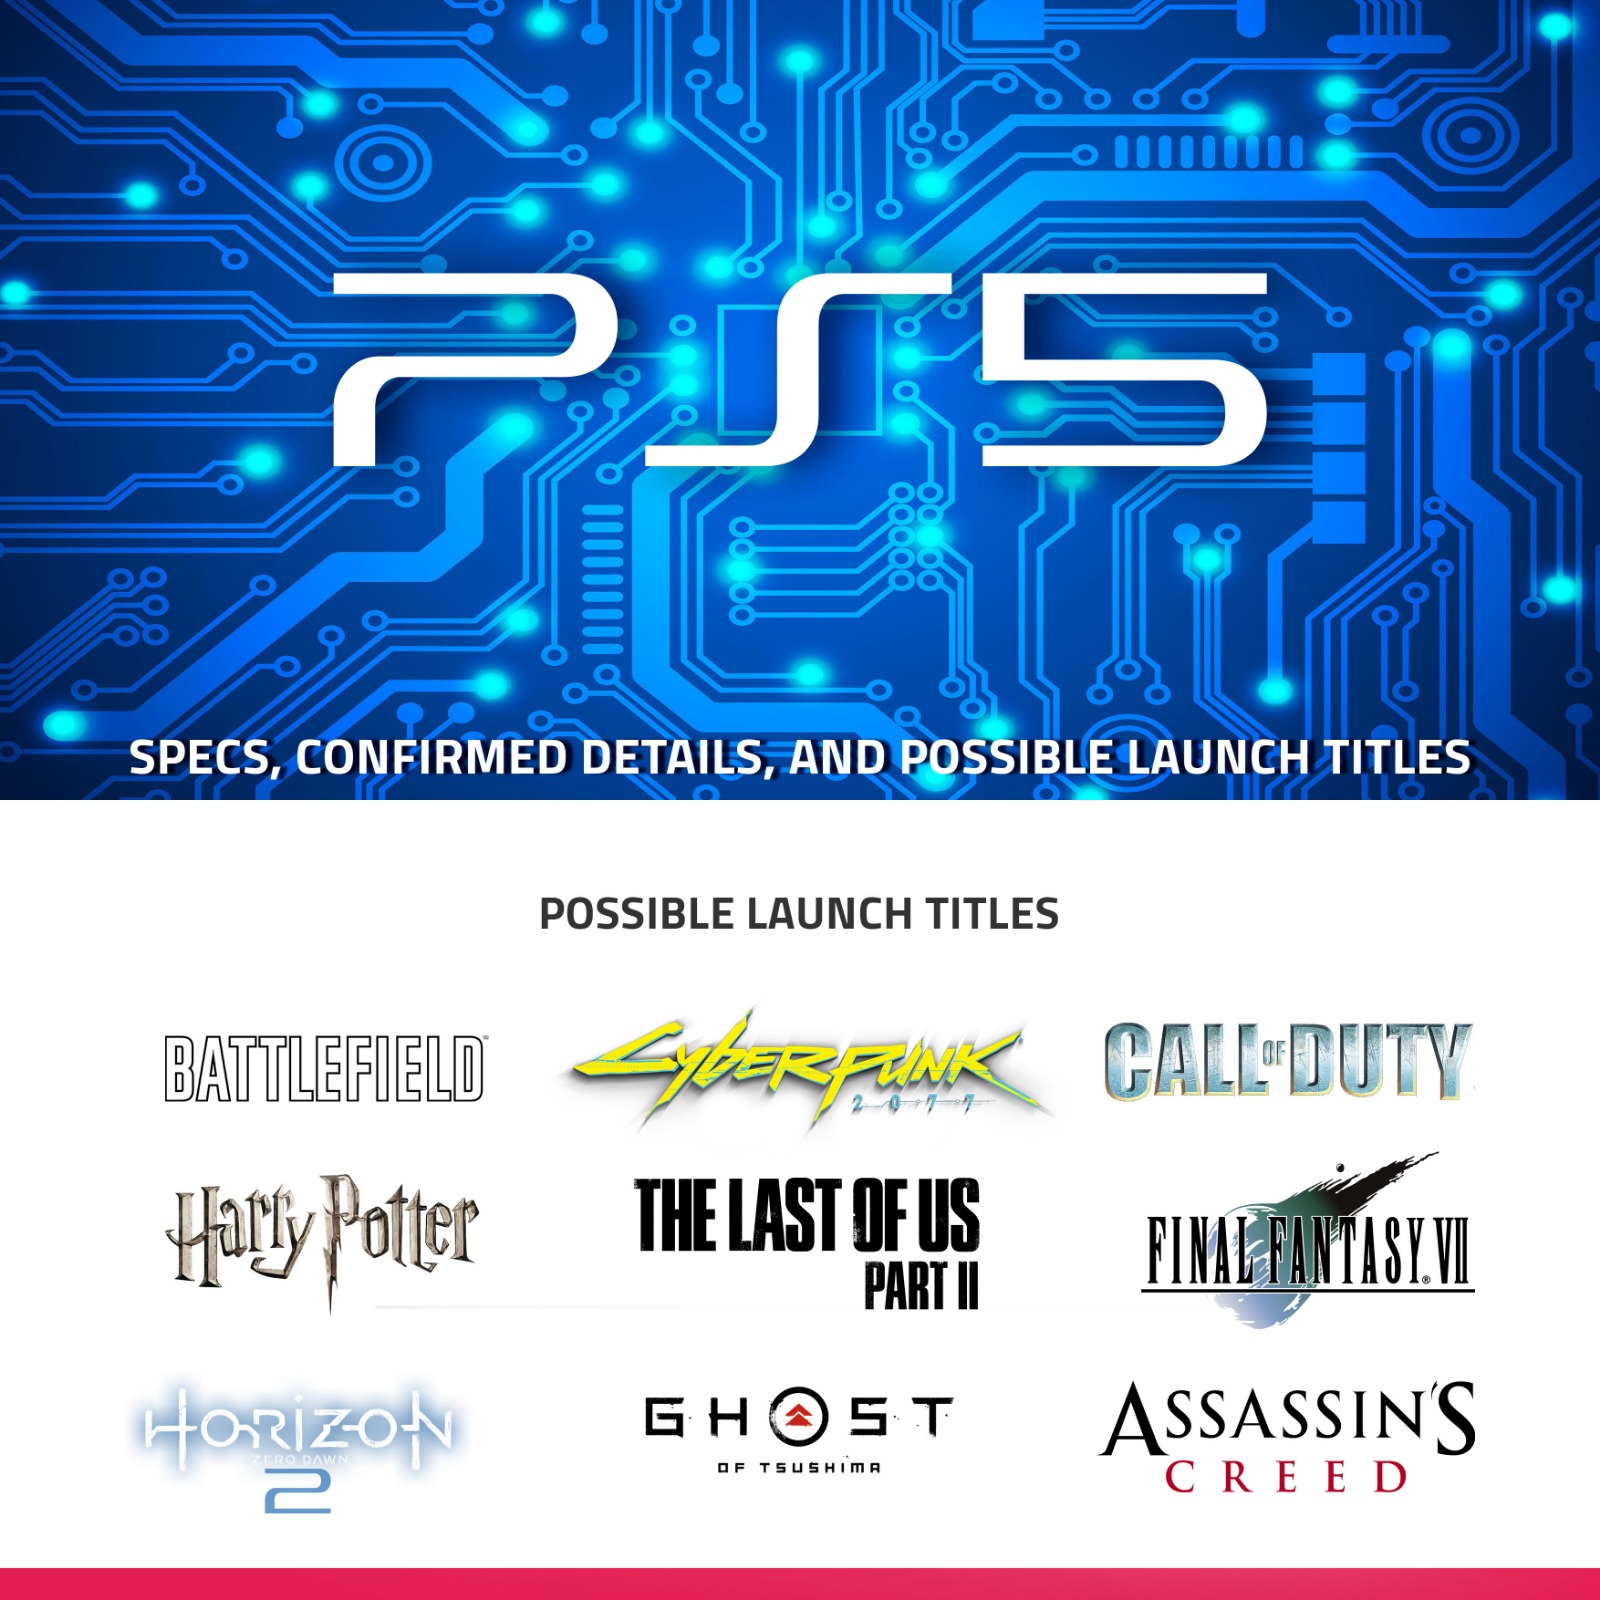 PS5 coming soon!